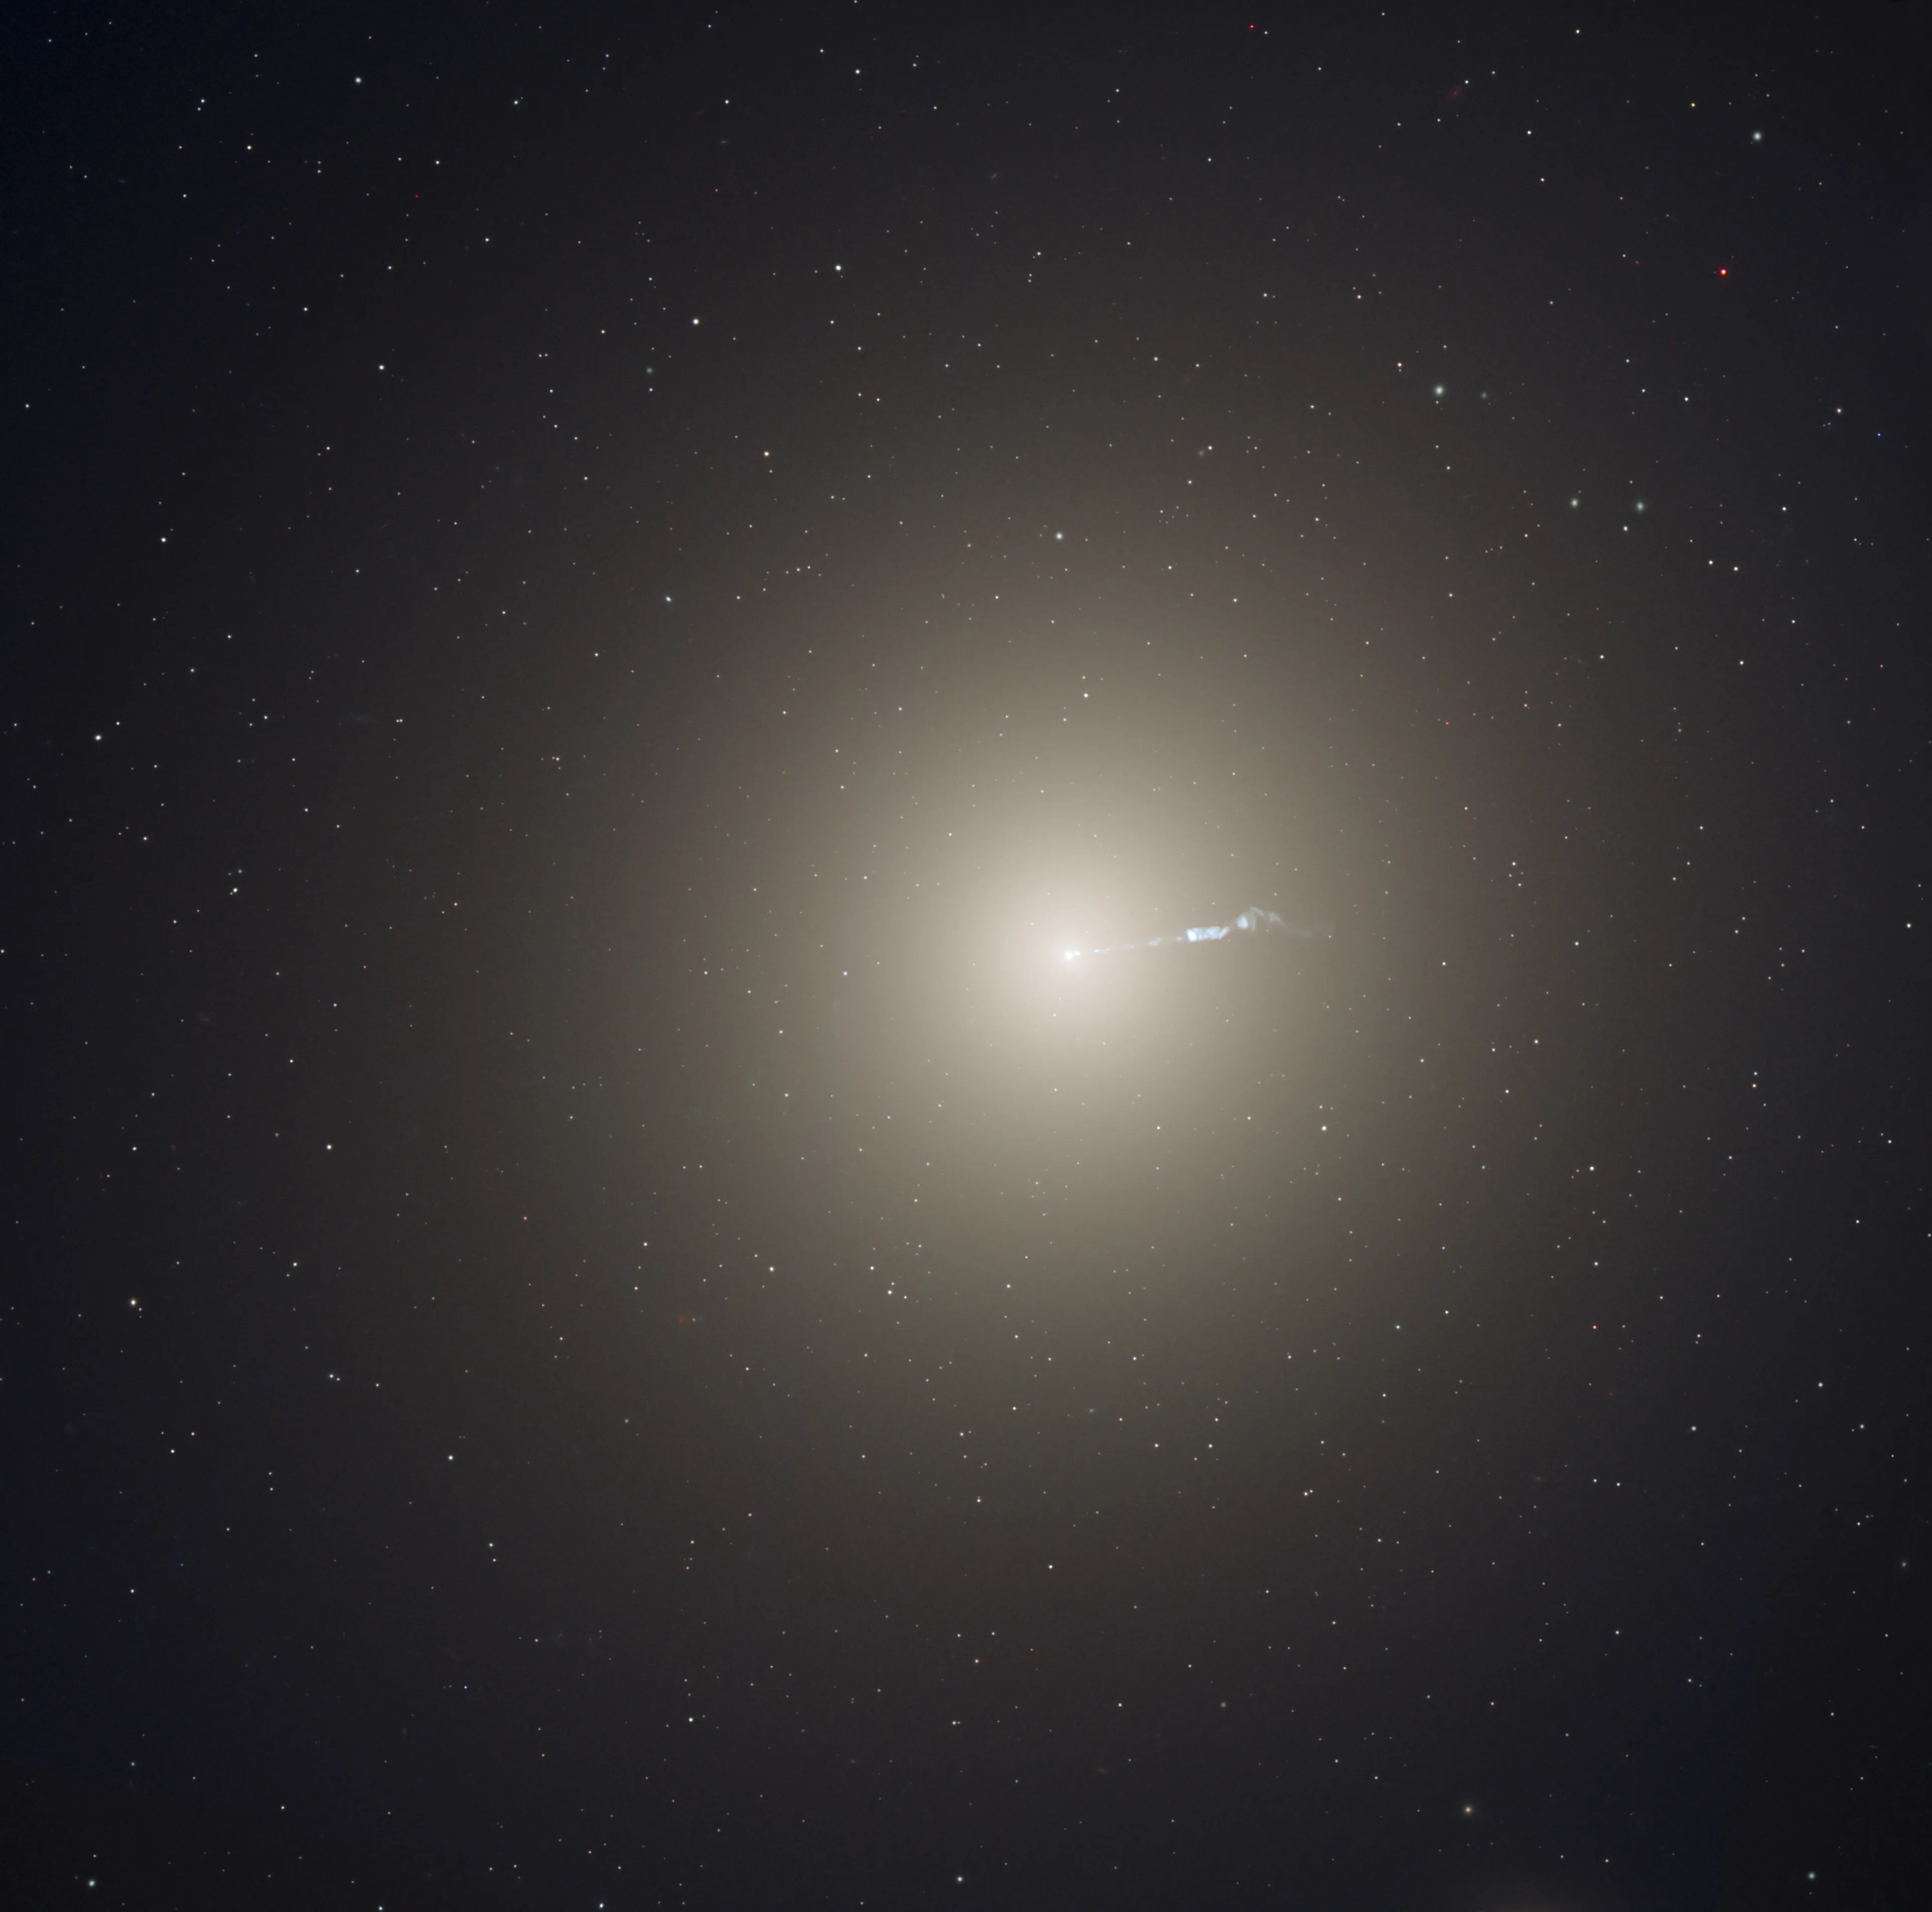 A bright, yellowish galaxy core shines near the center, with a faint jet of material ejecting toward the right.